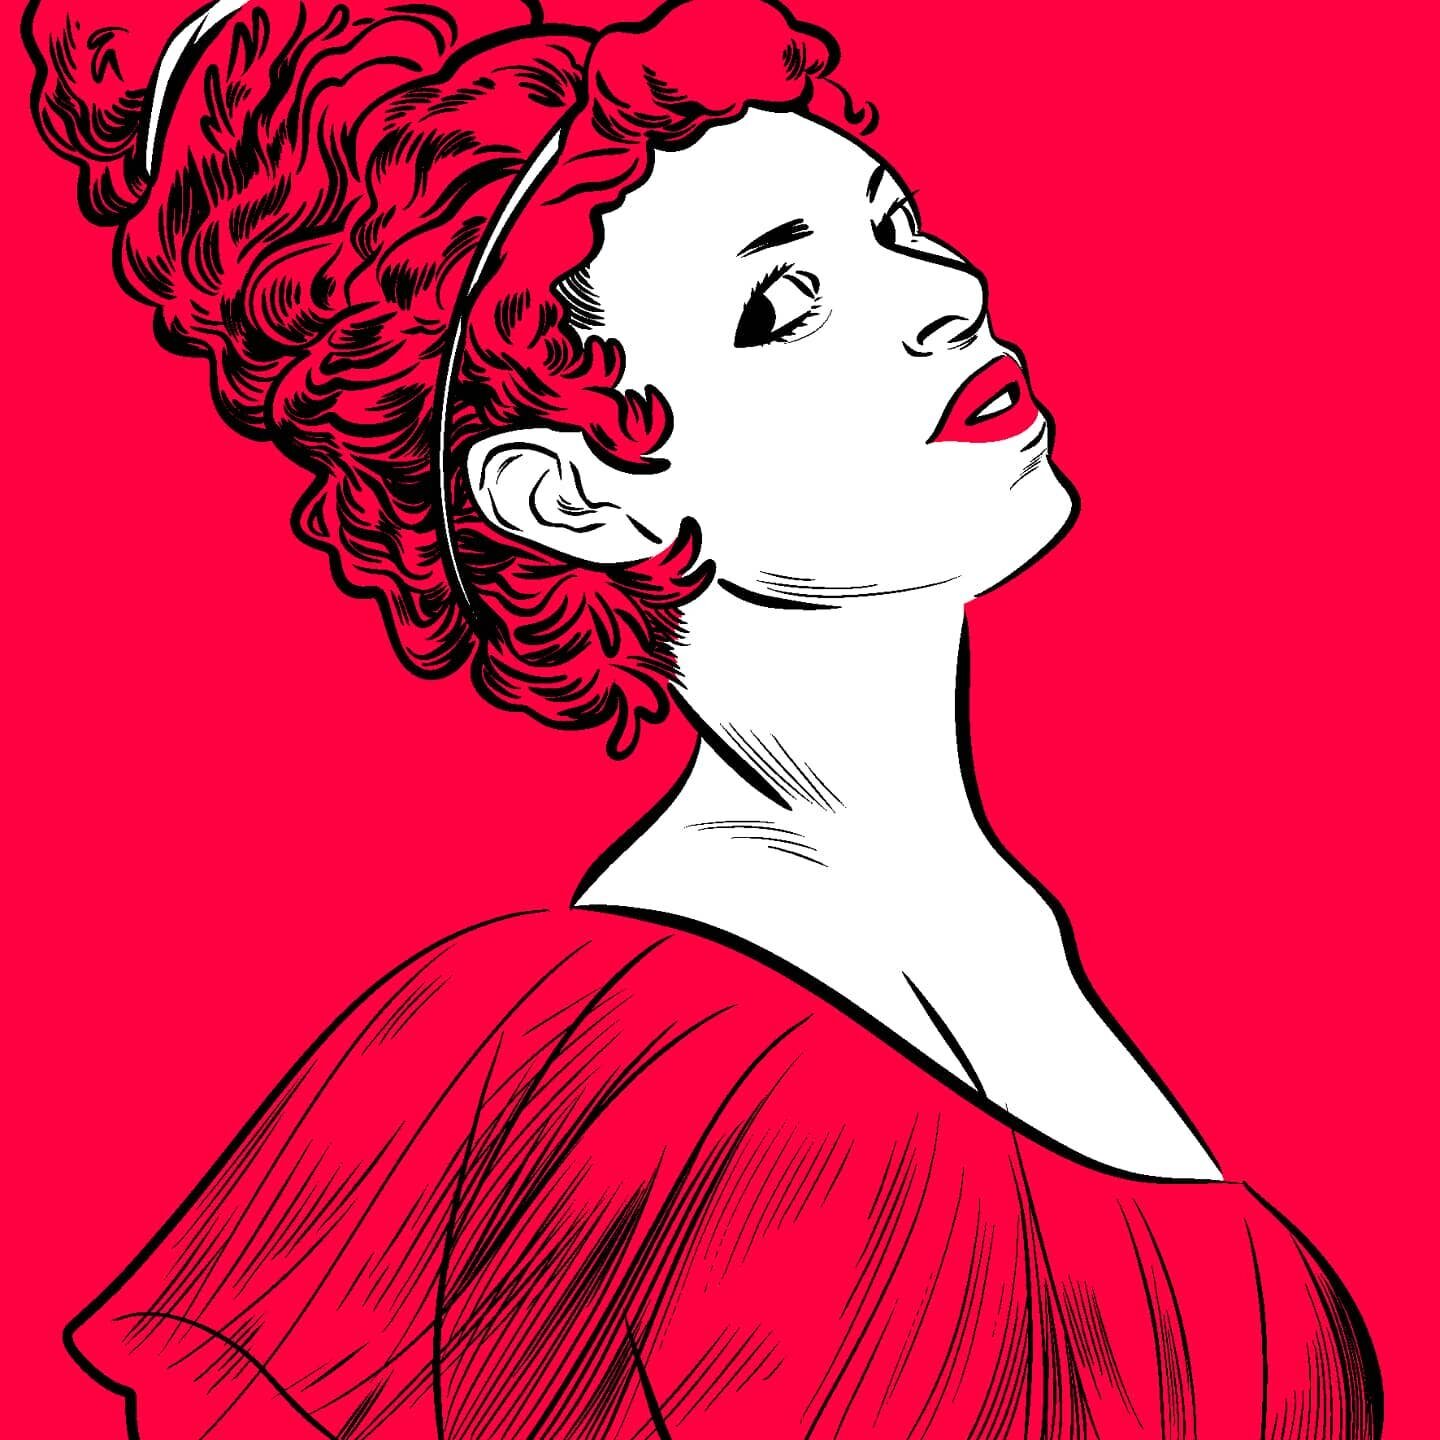 Red velvet. The color was already one of my two main swatches in clip studio--not sure what I was doing with it--but it seemed a fine one to me so that's what I used. Decision making, eliminated!
.
.
.
#instaart #instaartist #illustratorsofinstagram 